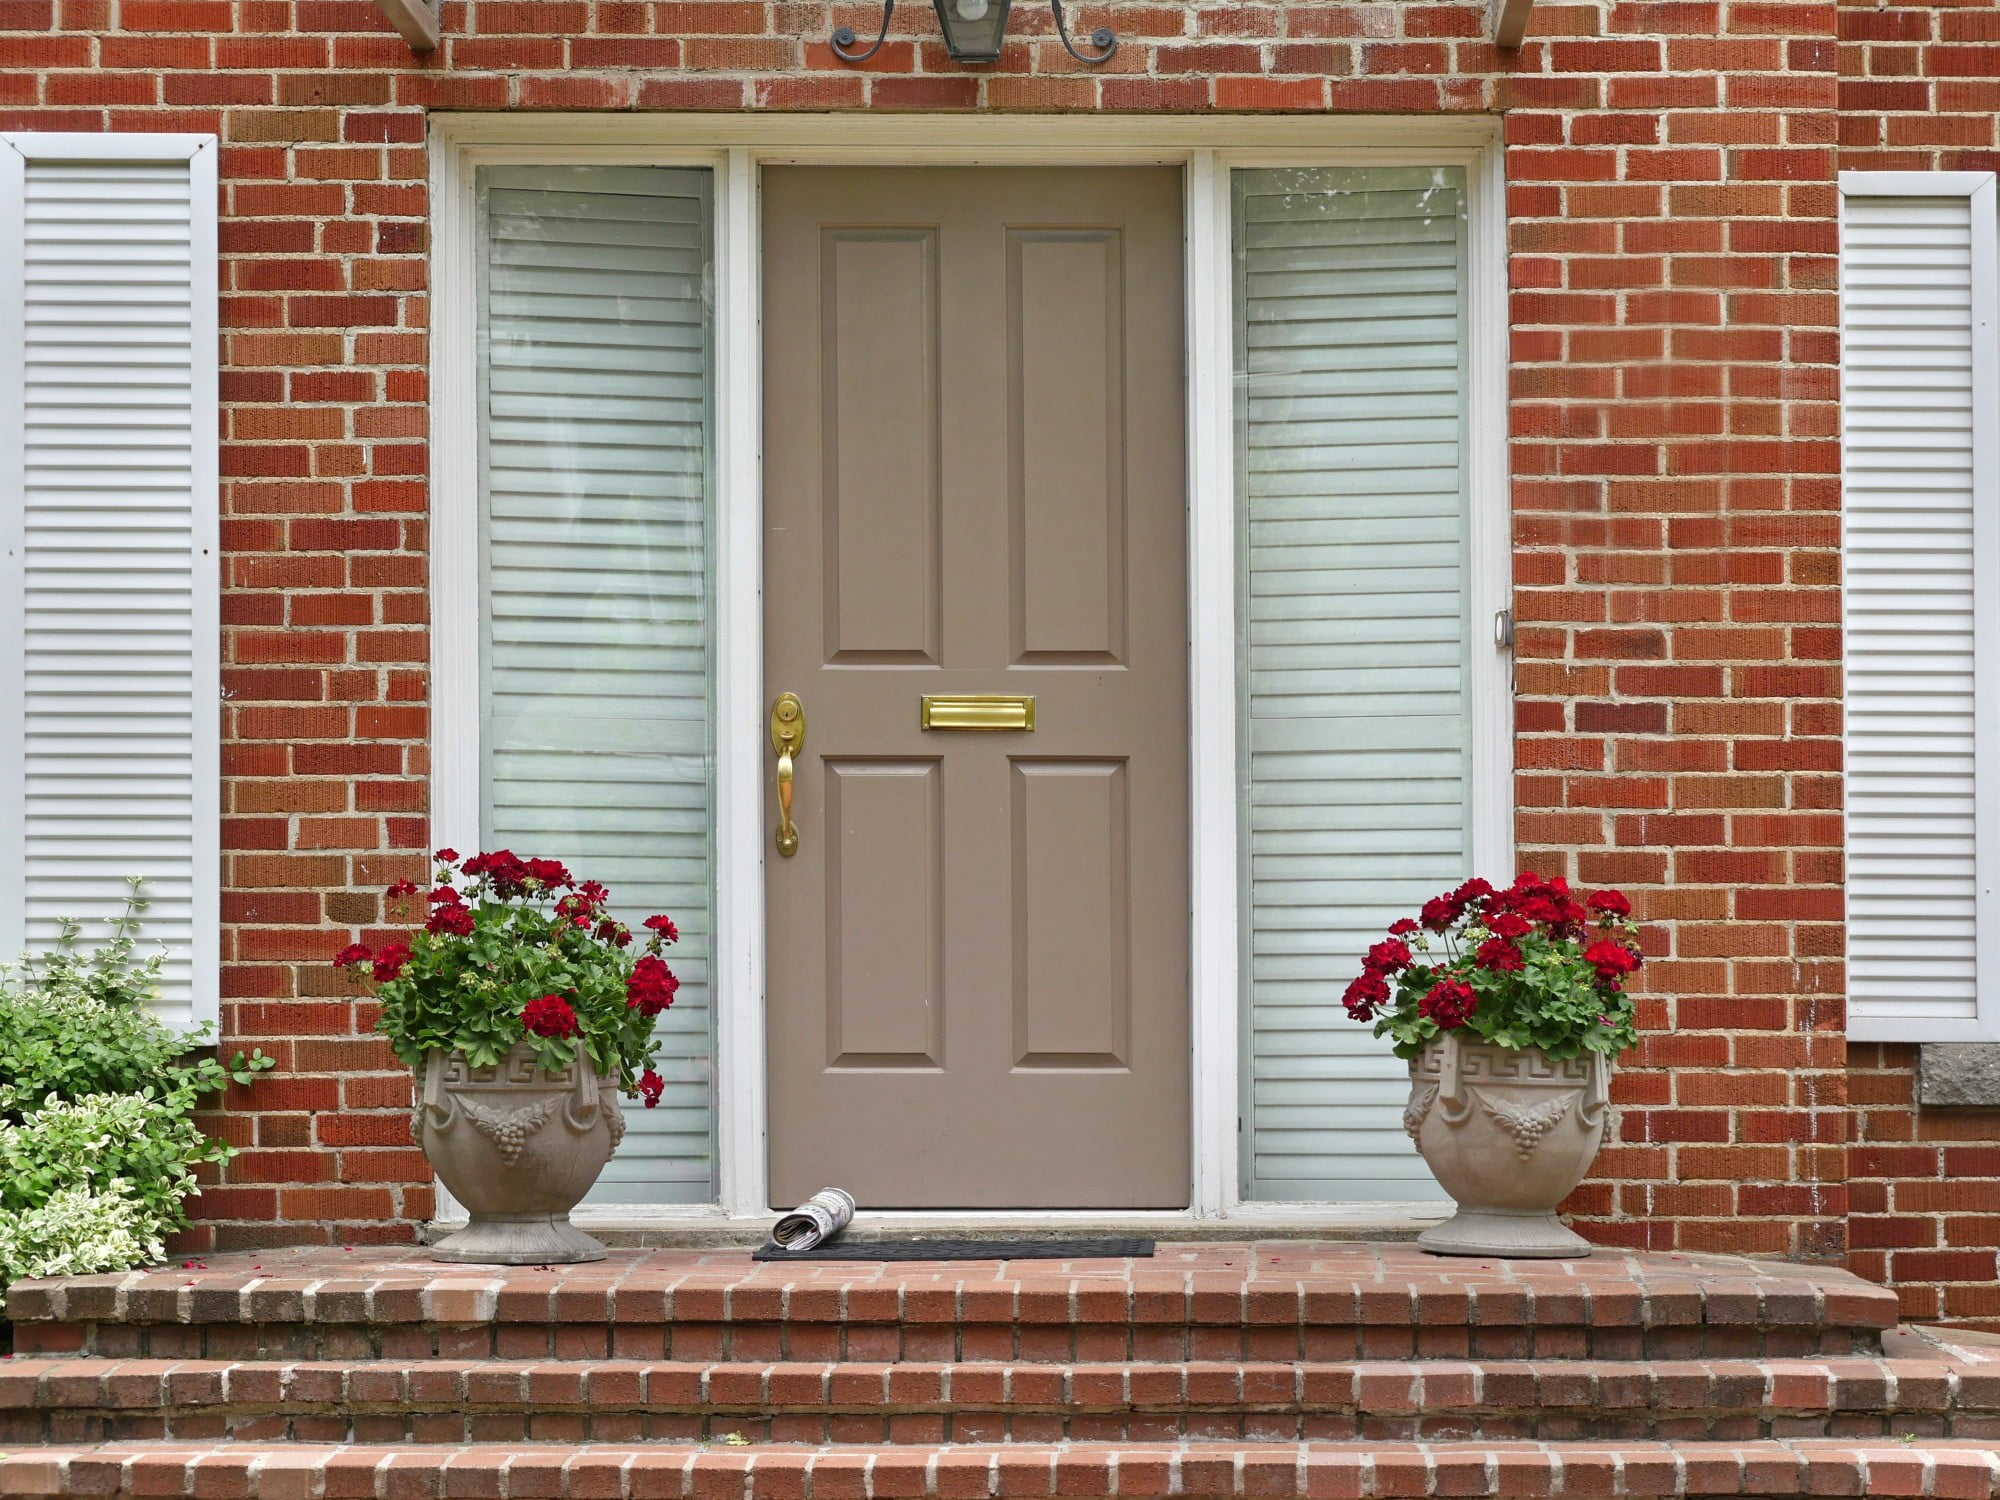 Unfortunately, doors are not made to last forever. Make sure to look out for these 5 major signs you need a door replacement.